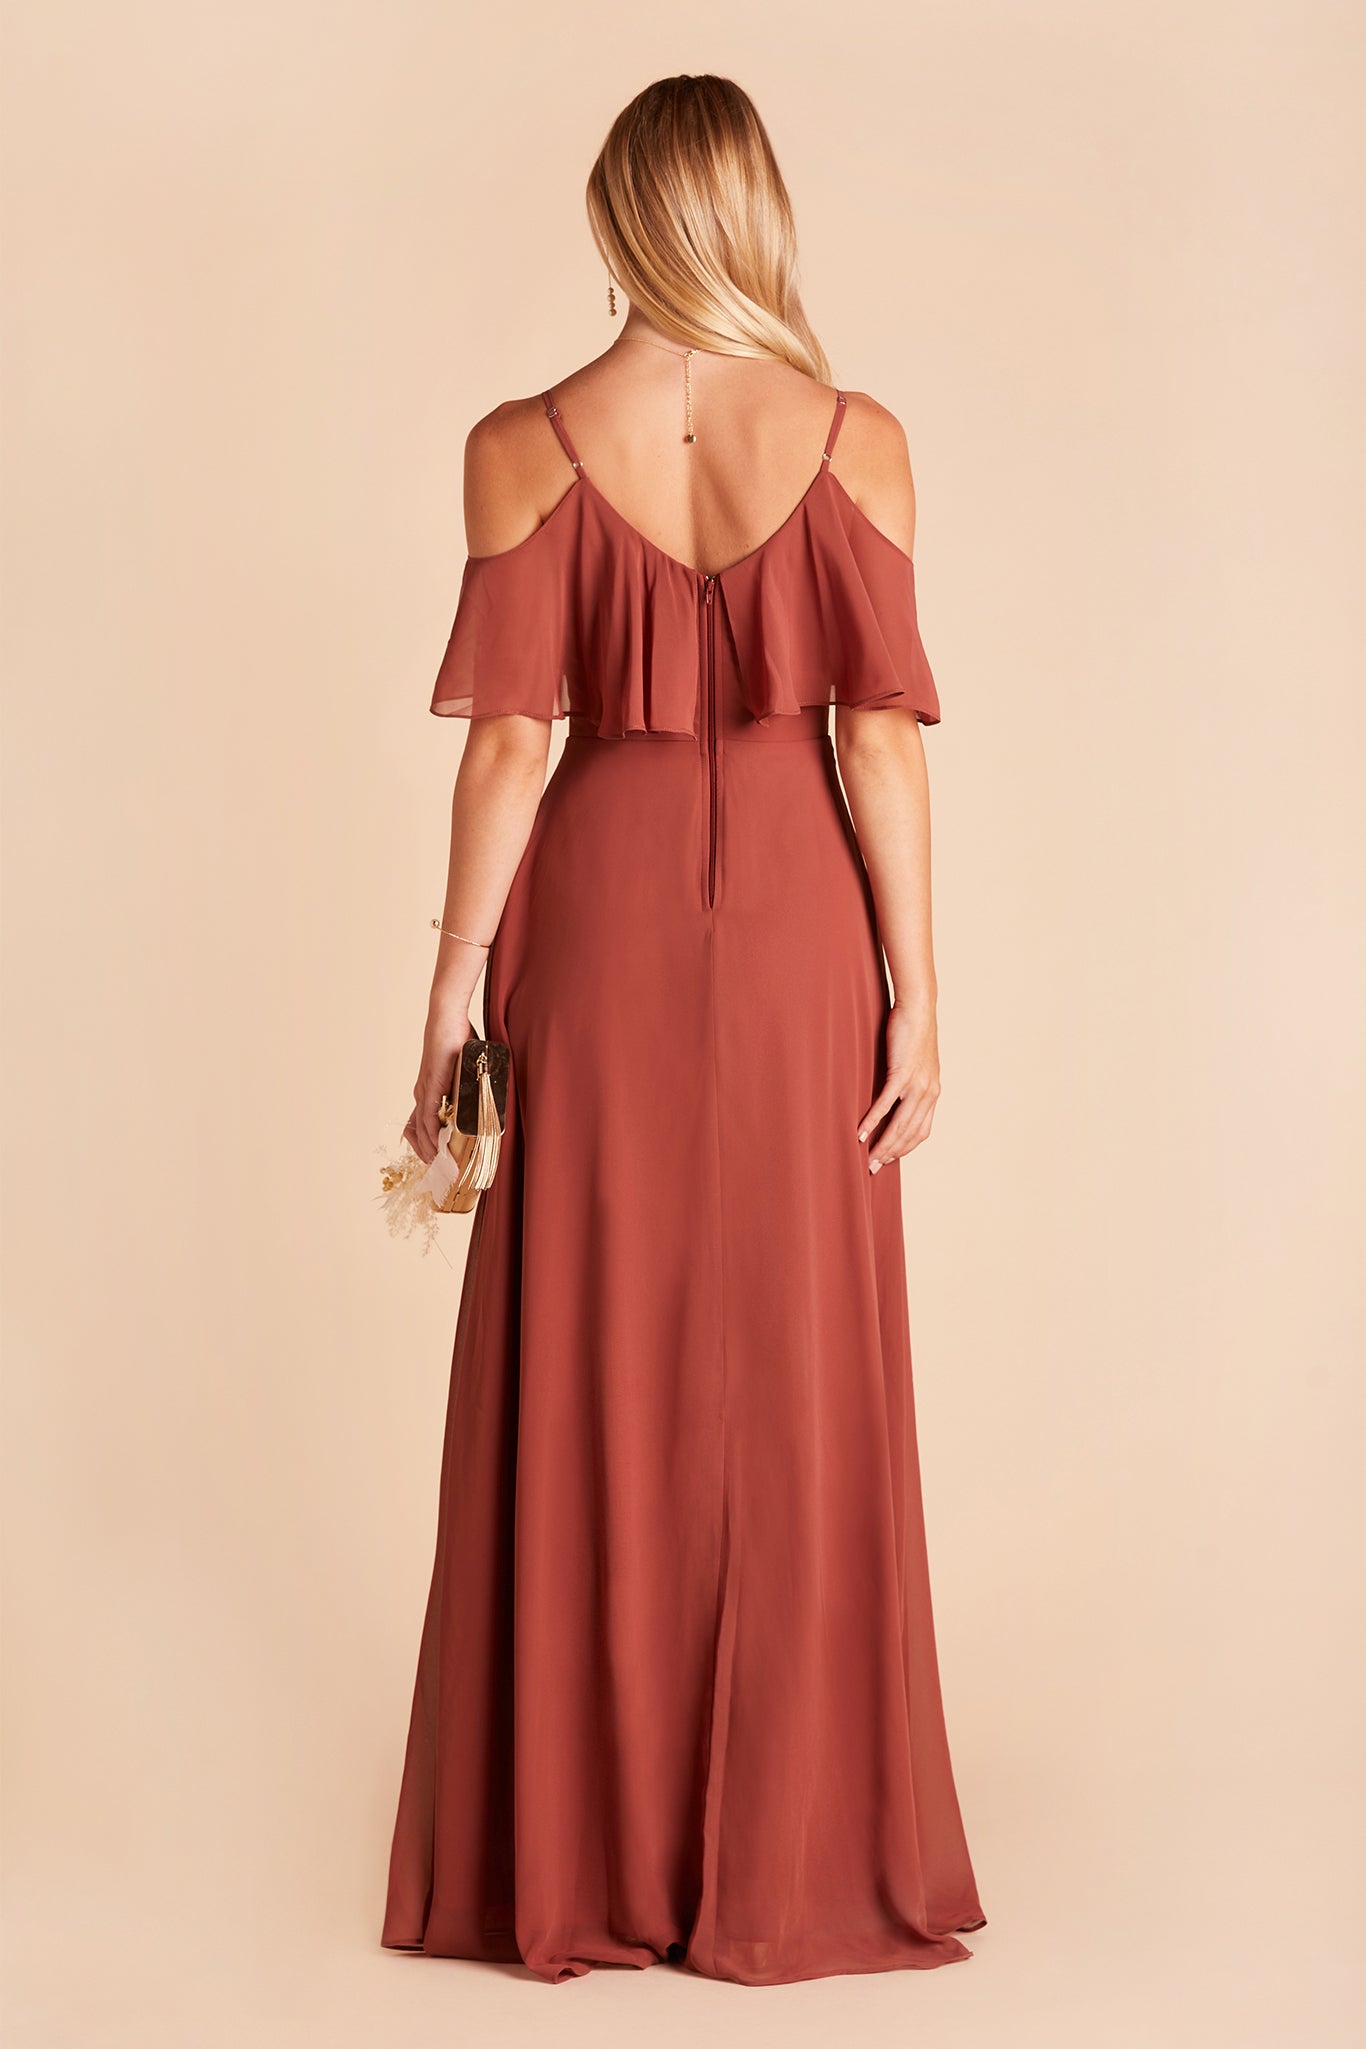 Jane convertible bridesmaid dress with slit in spice chiffon by Birdy Grey, back view